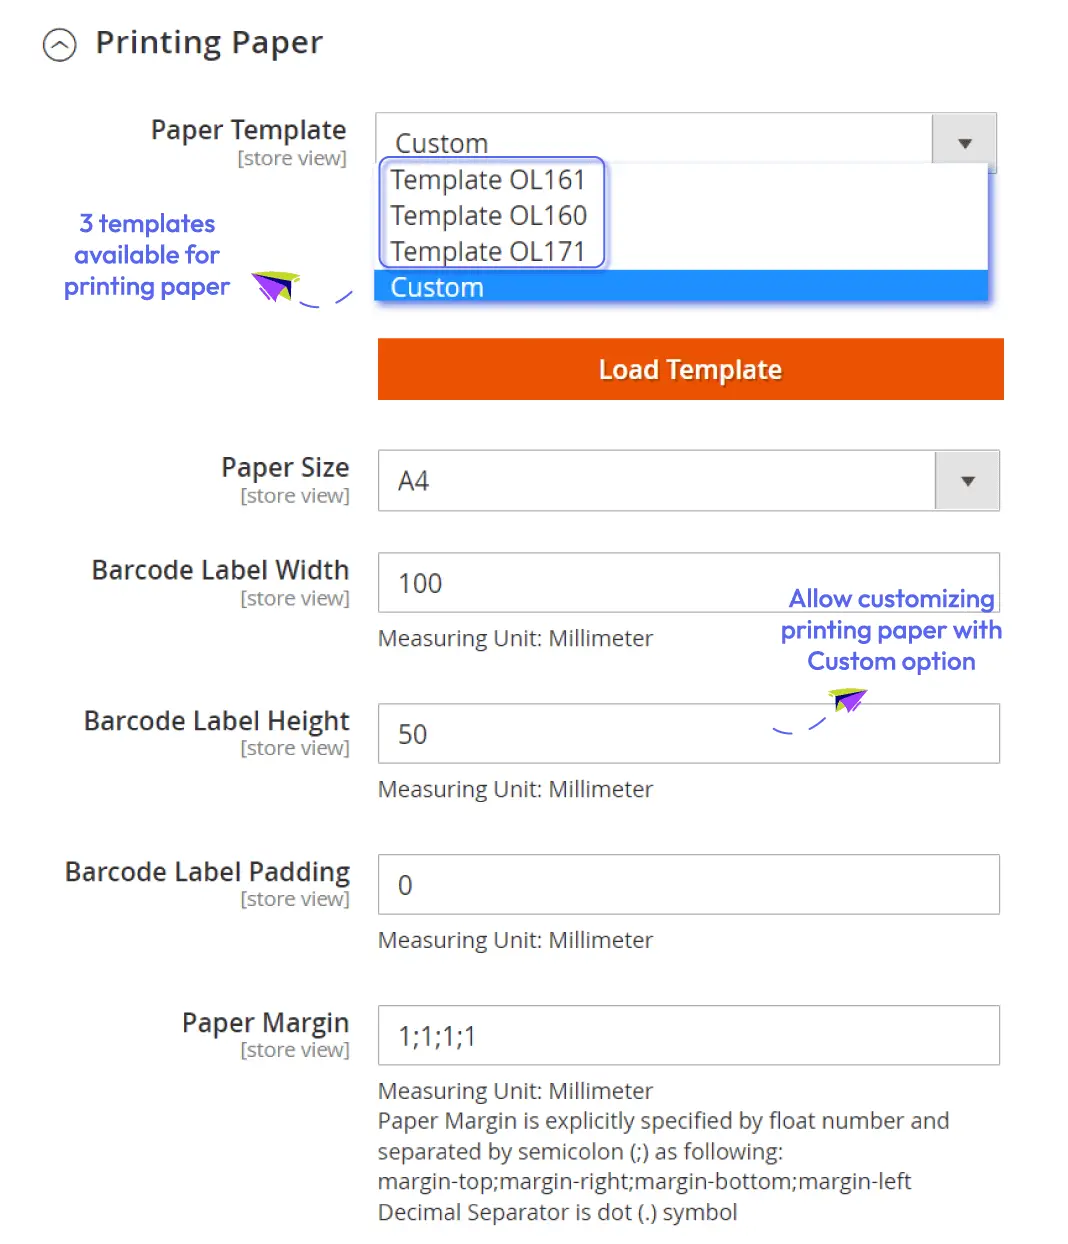 Magento 2 barcode customize priting paper